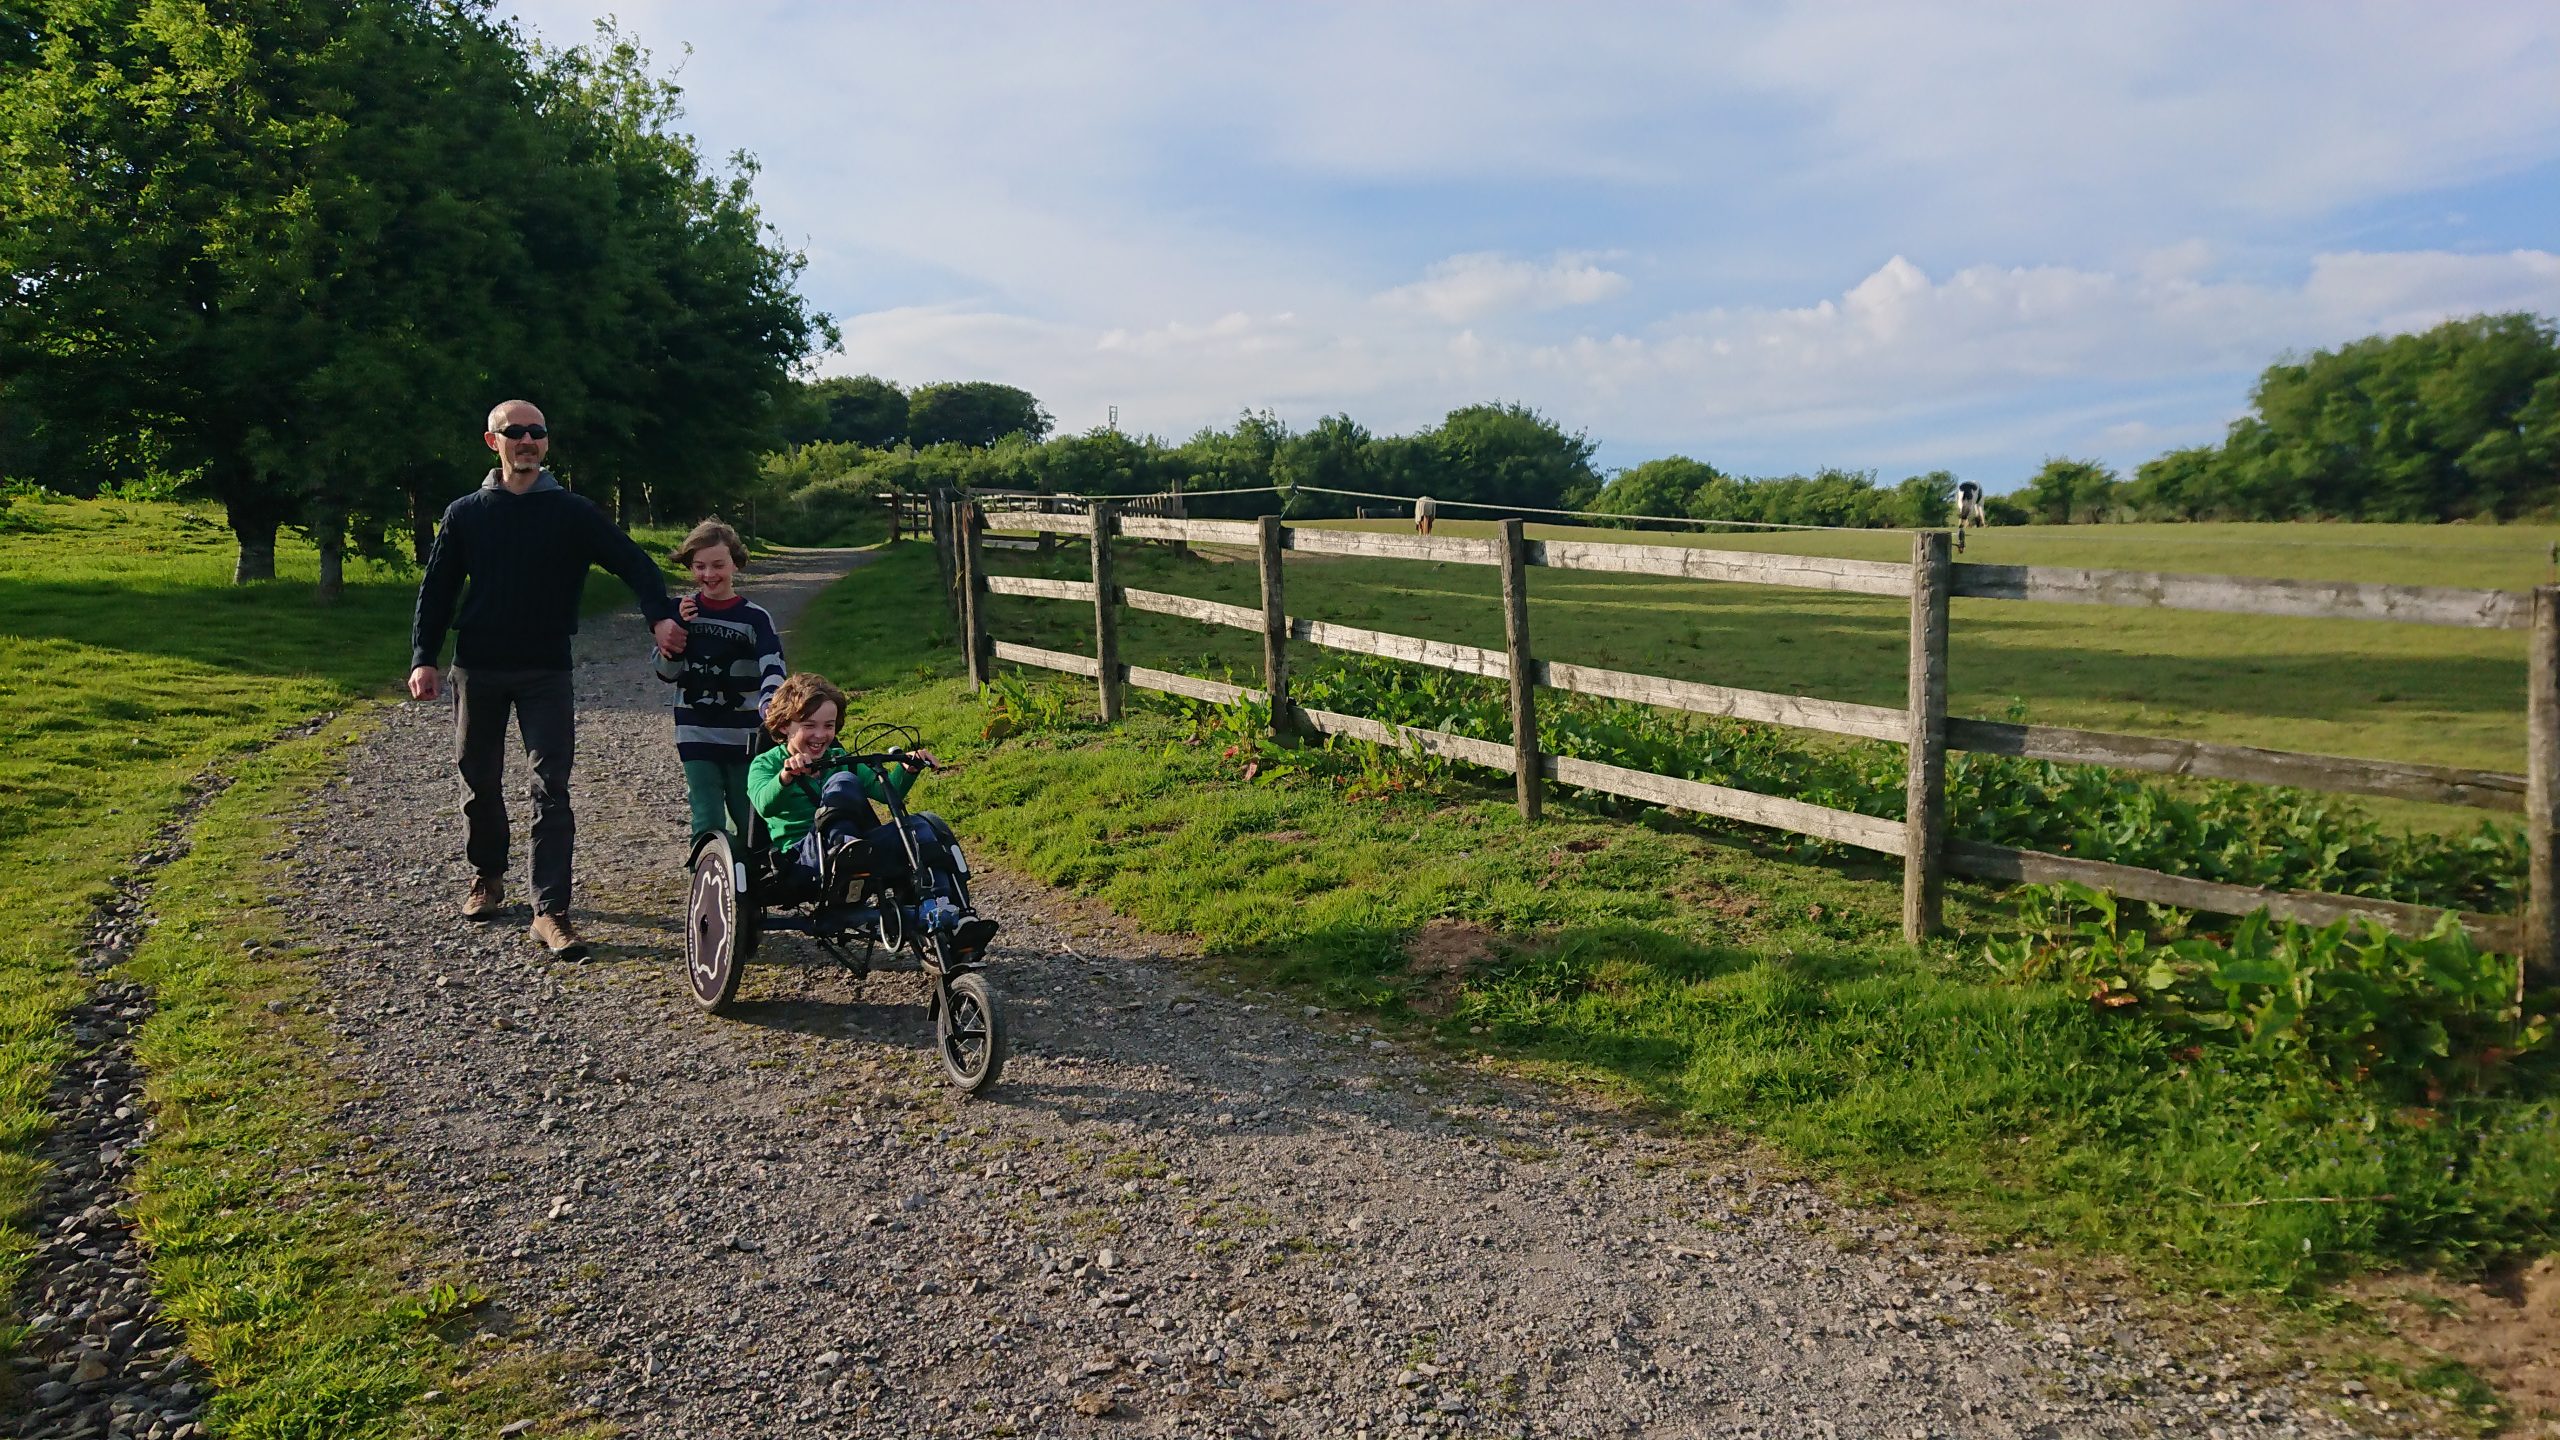 A man wearing sunglasses is holding the arm of a young boy to the right and they are smiling walking downhill behind a boy who is on a recumbent bicycle, smiling and cycling.